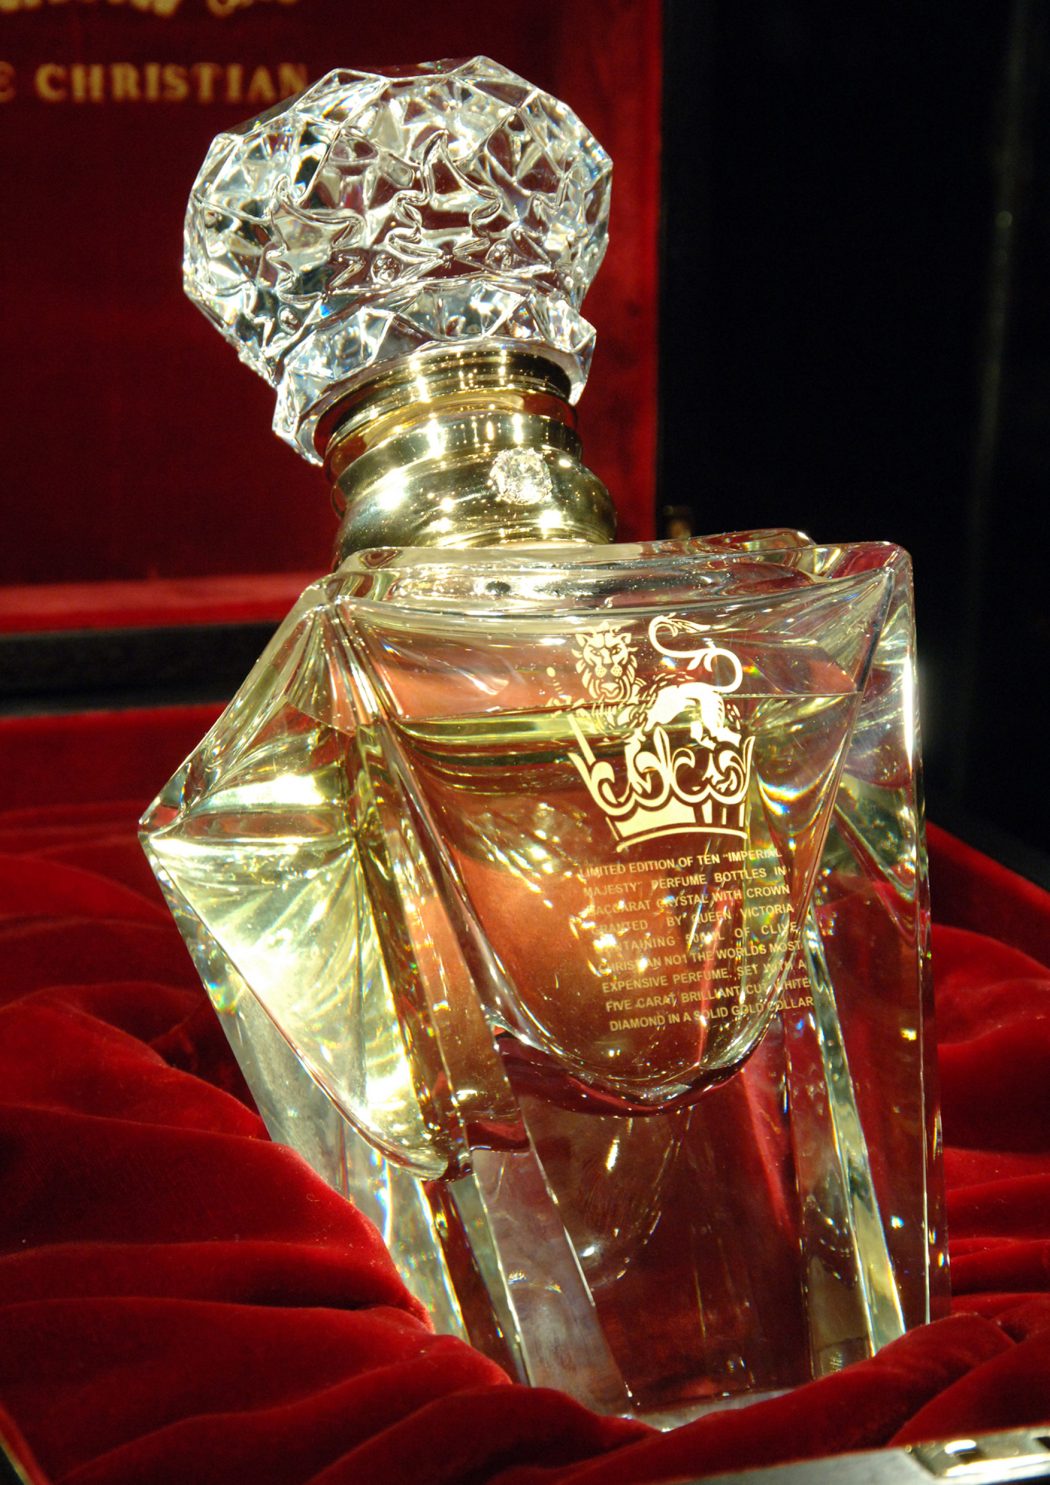 clive christian no-1 perfume imperial majesty edition closeup